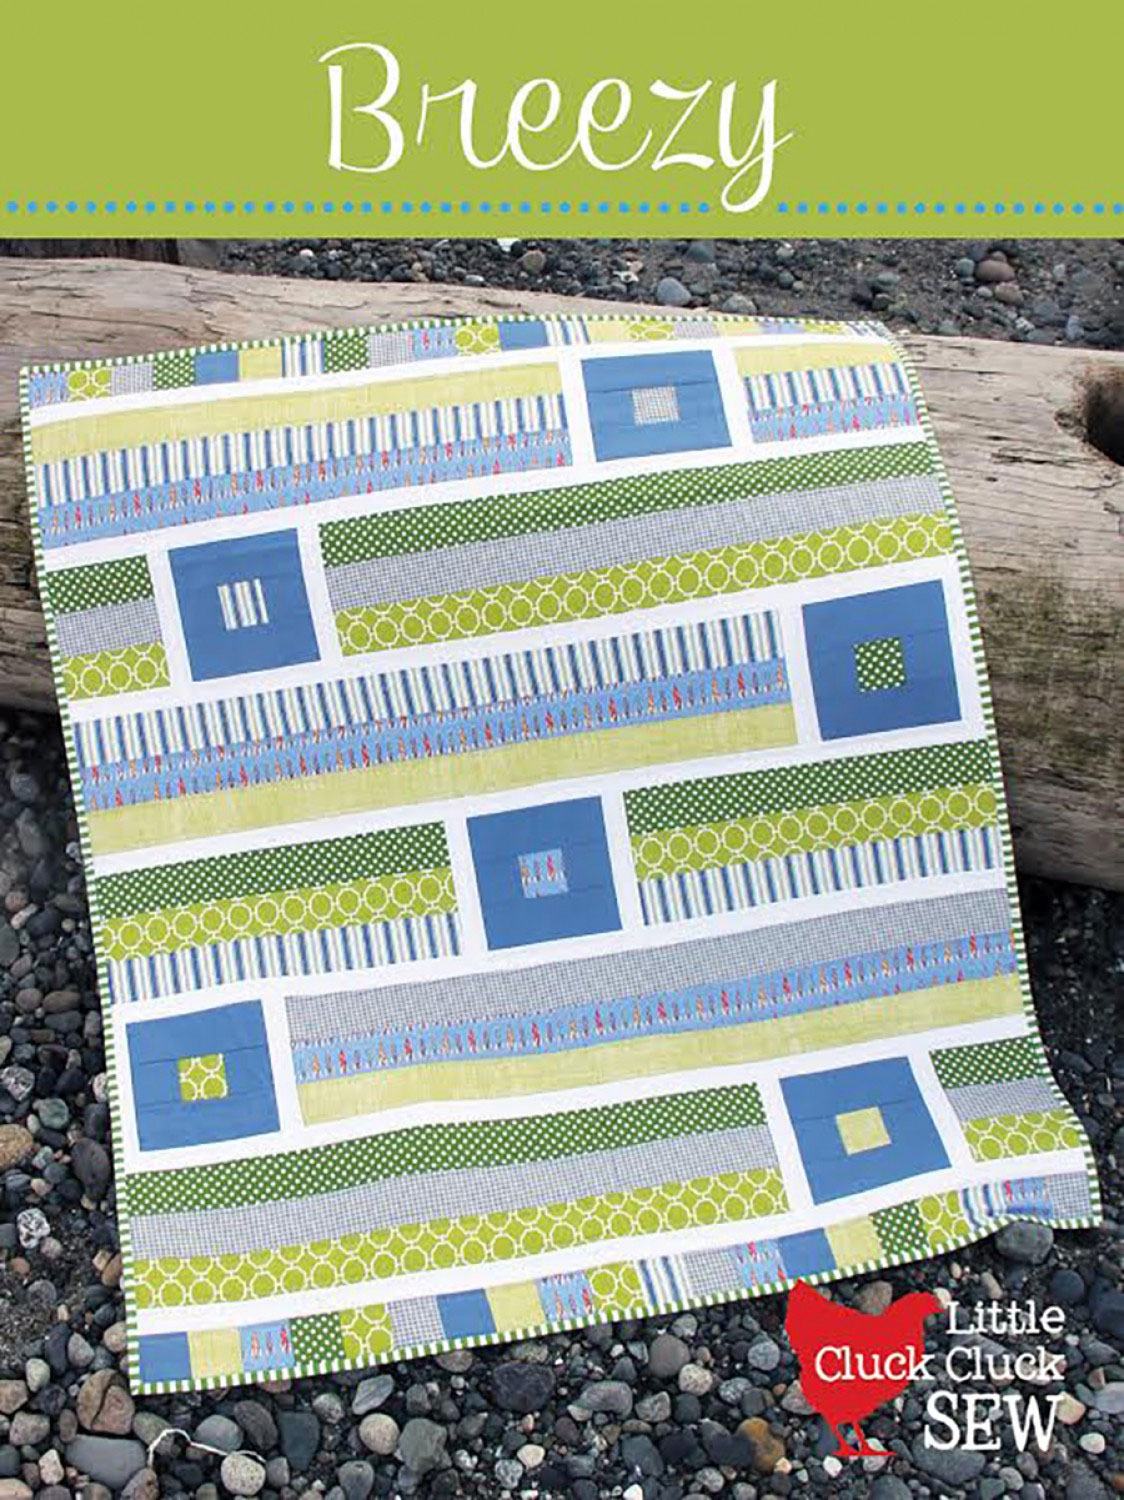 Breezy-quilt-sewing-pattern-Cluck-Cluck-Sew-front